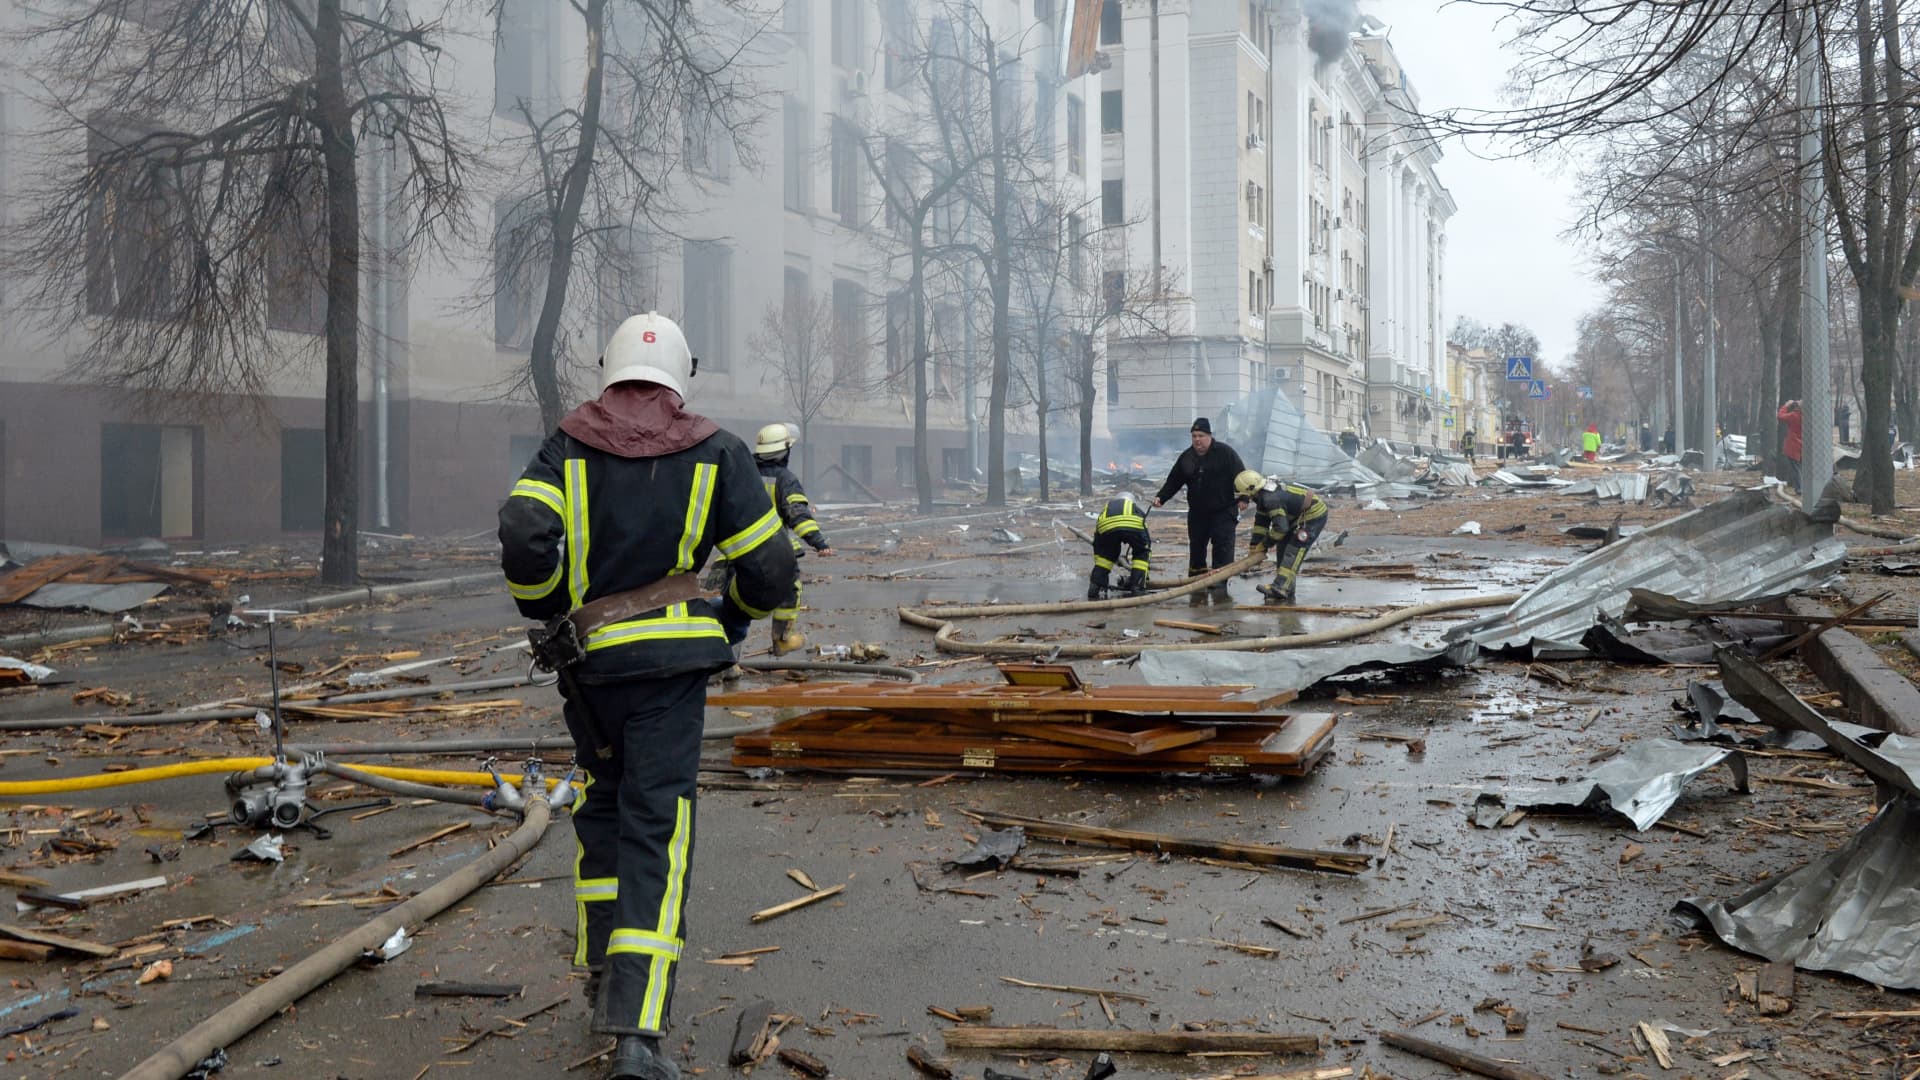 Firefighters work to contain a fire at the Economy Department building of Karazin Kharkiv National University, allegedly hit during recent shelling by Russia, in Kharkiv on March 2, 2022.